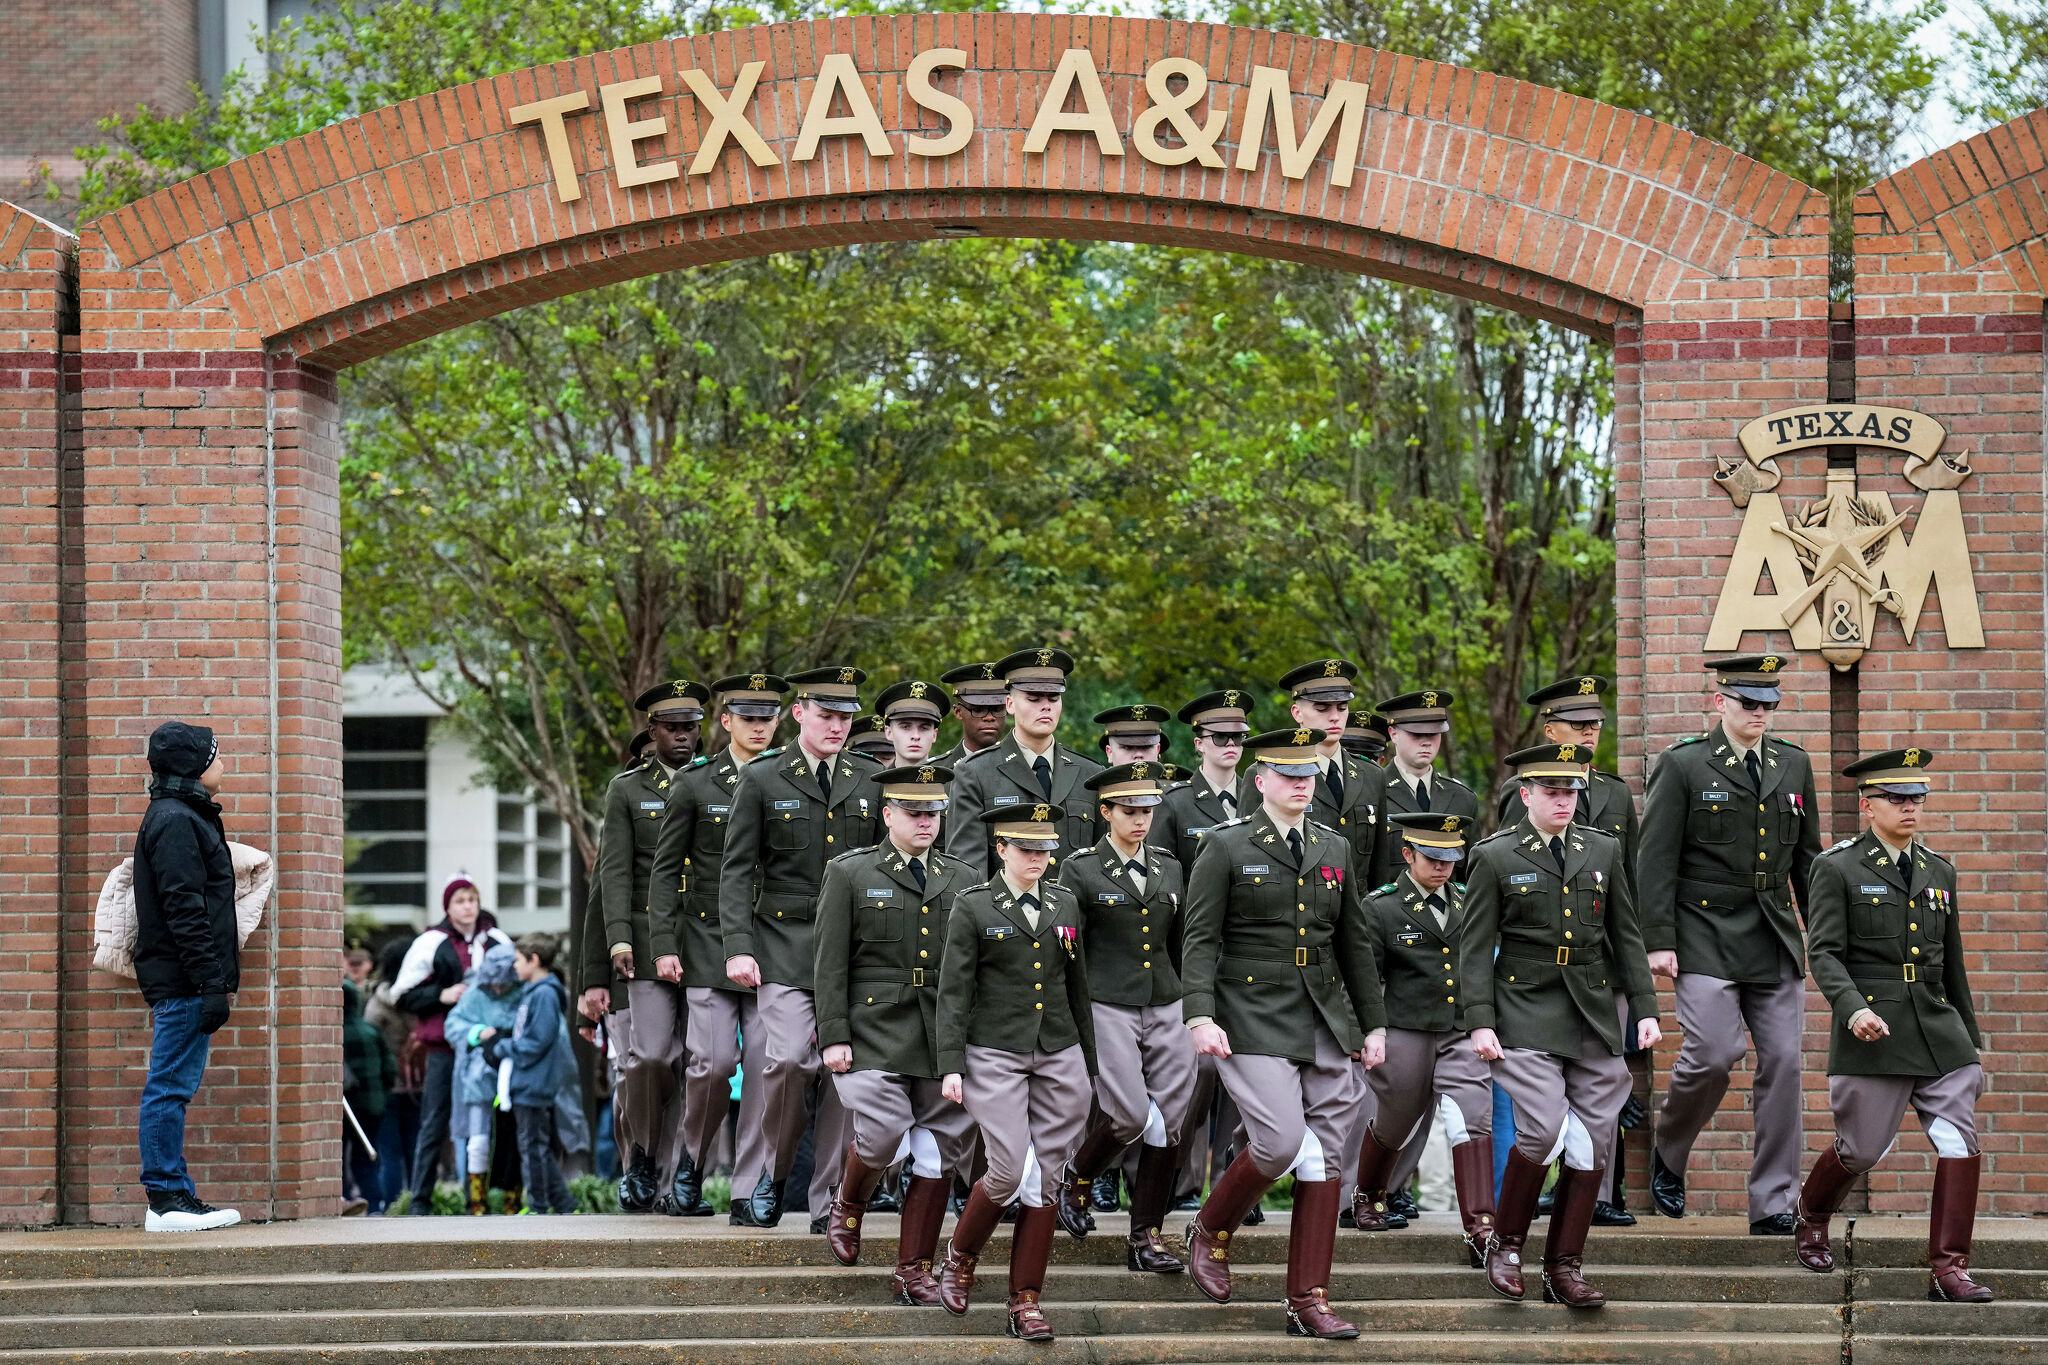 Texas A M University Of Texas Among Cultiest Colleges In U S